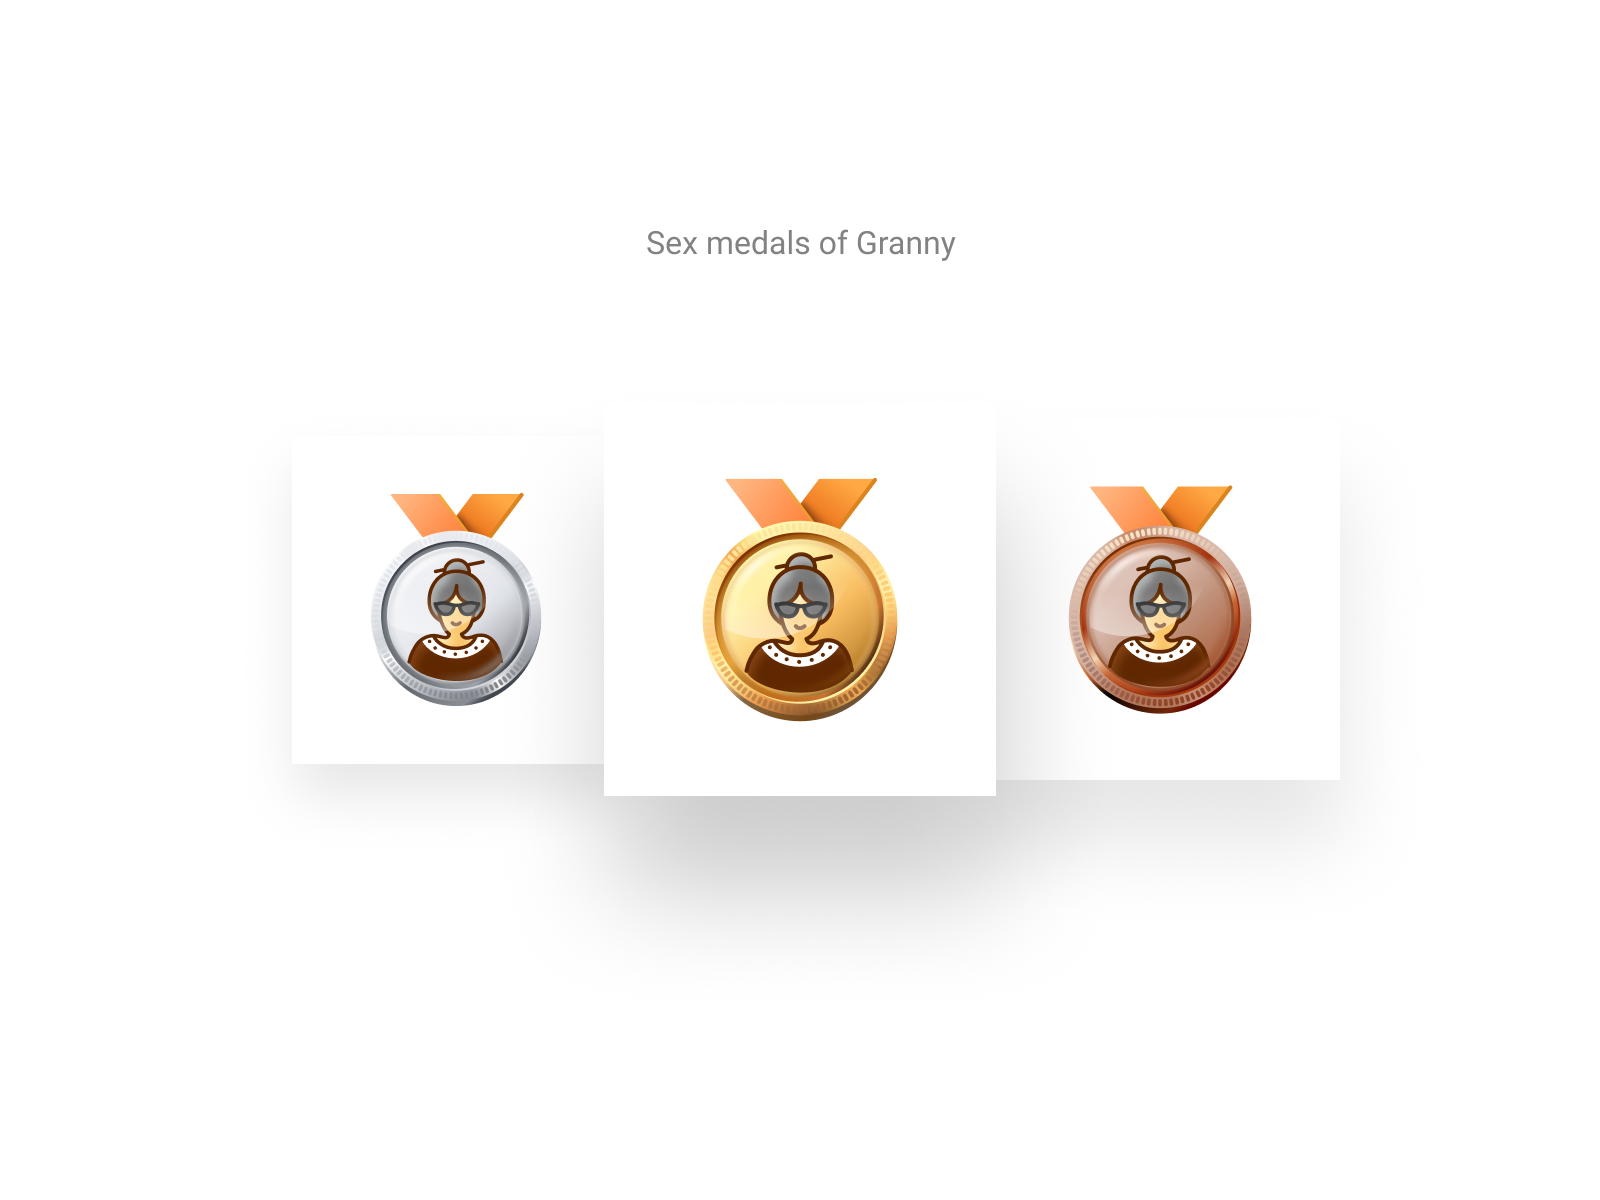 Sex medals of passion #2 badge grandmother granny icon